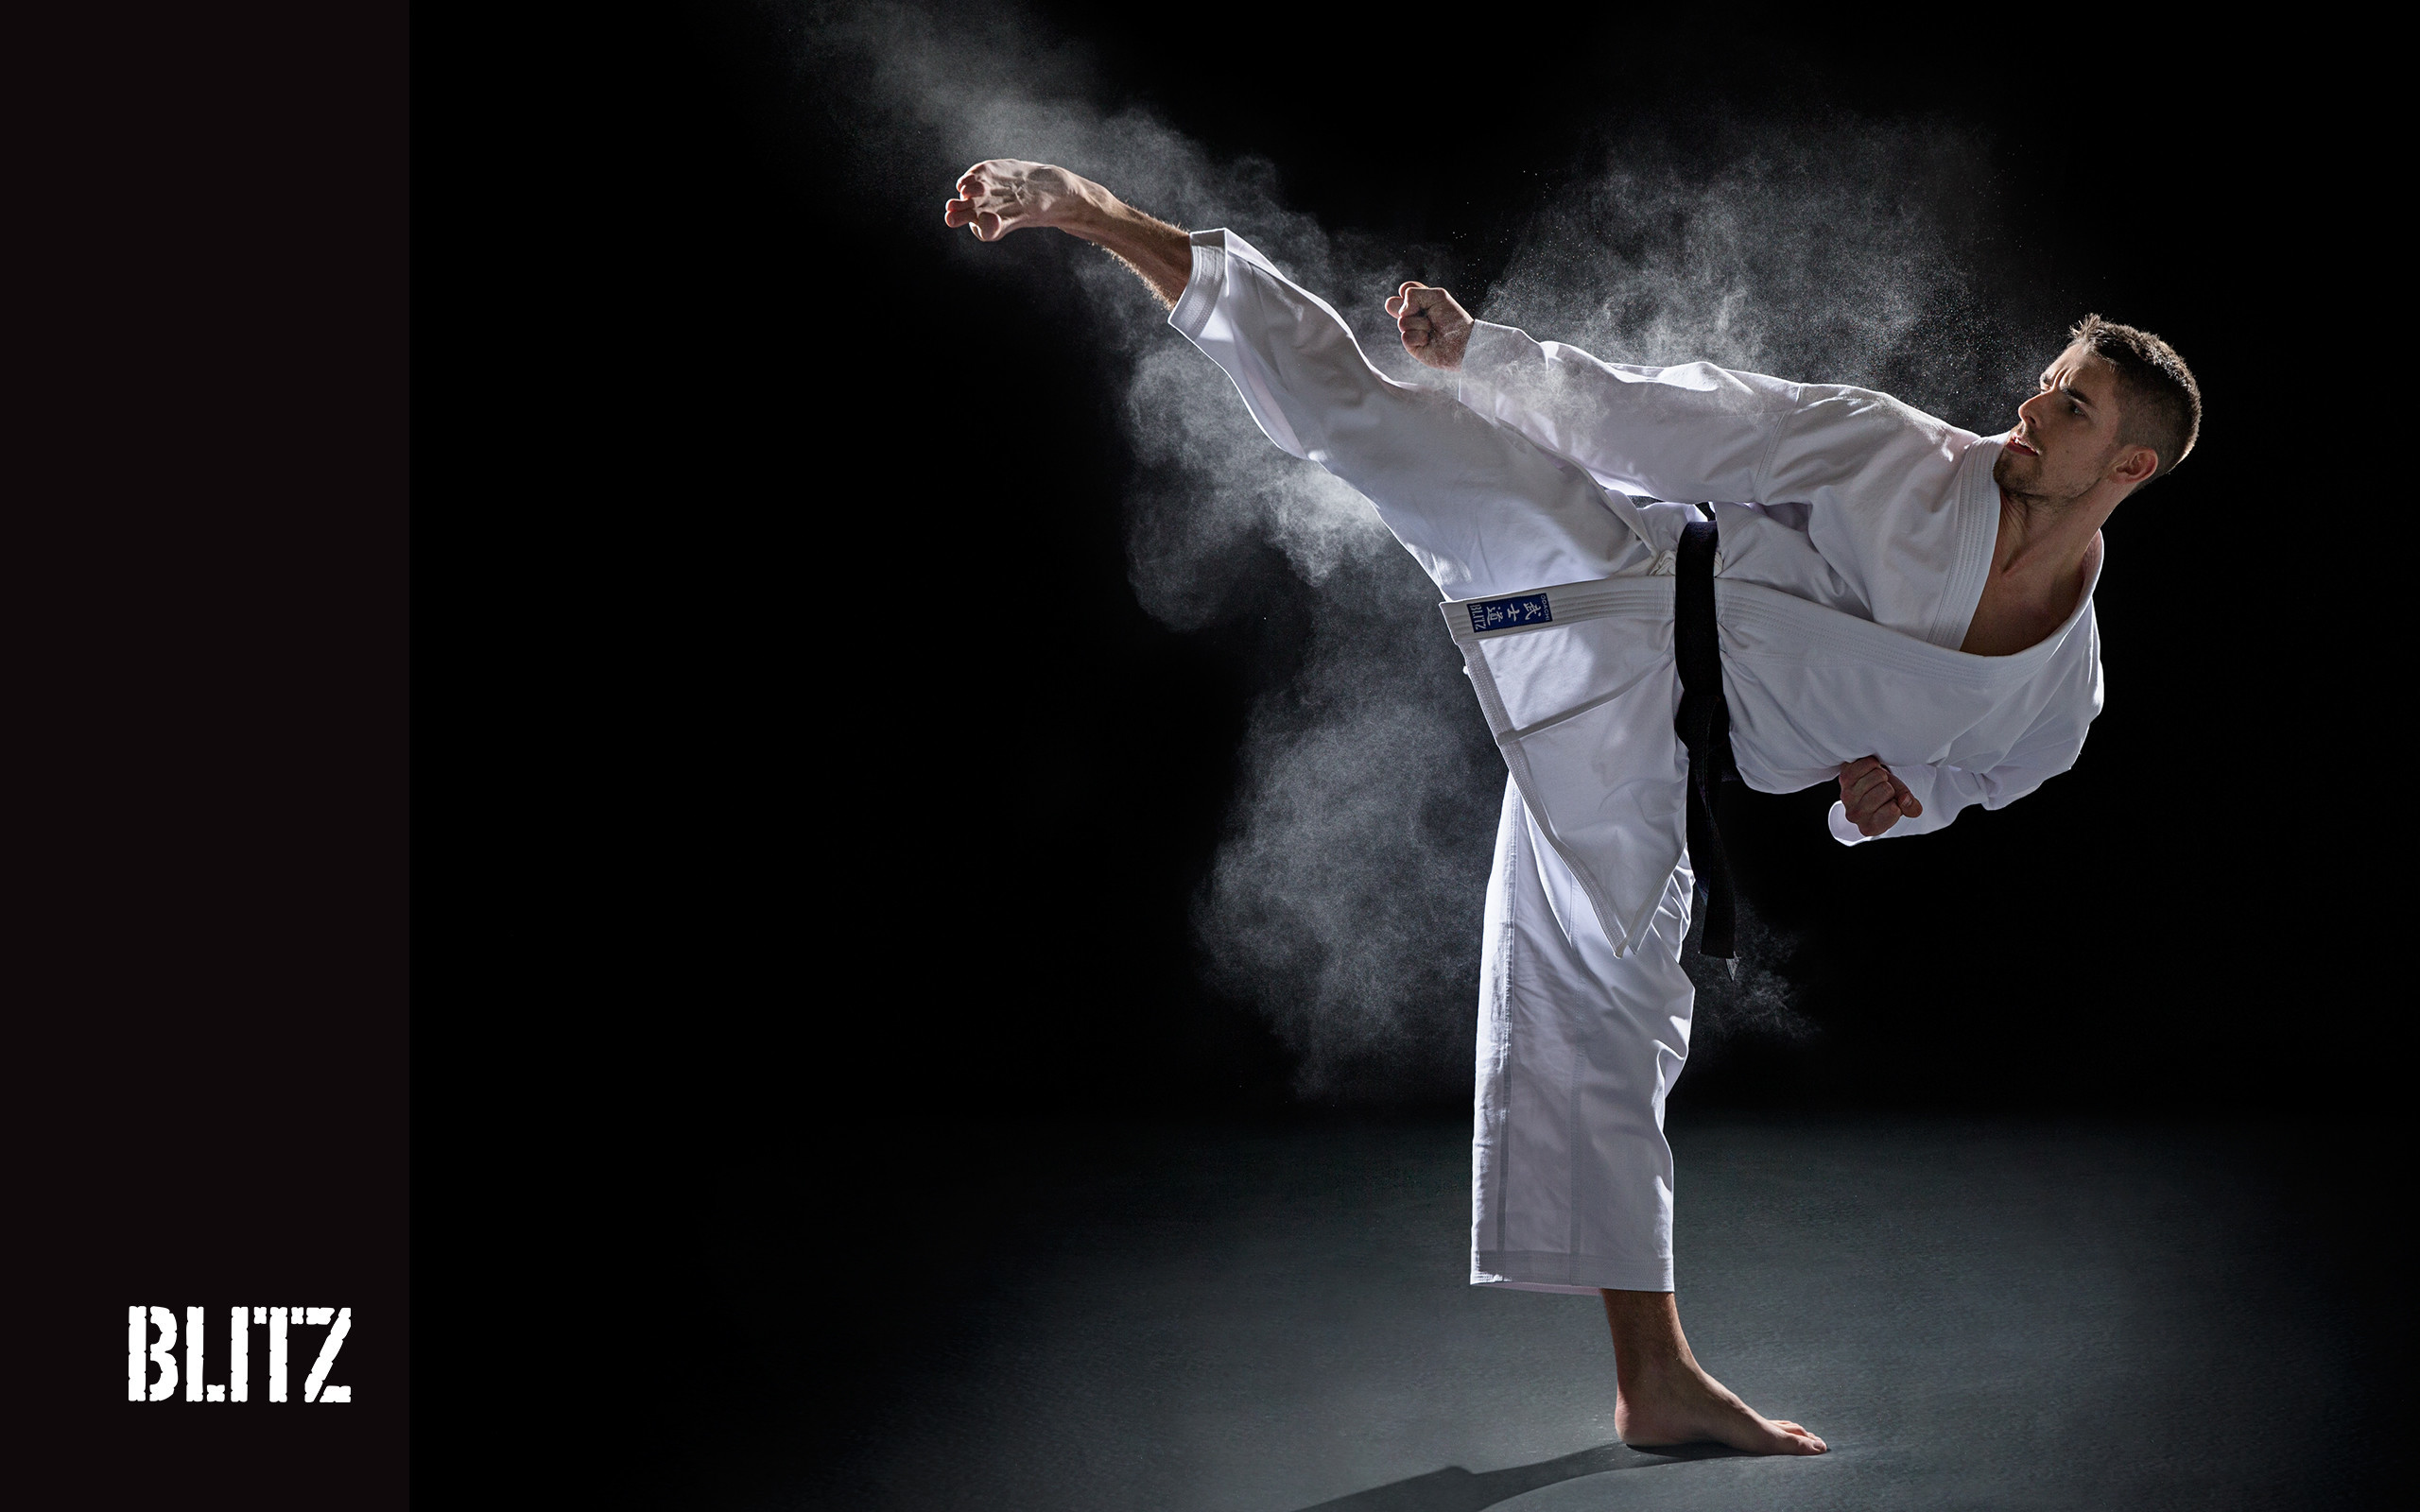 Martial Arts Background Images HD Pictures and Wallpaper For Free Download   Pngtree